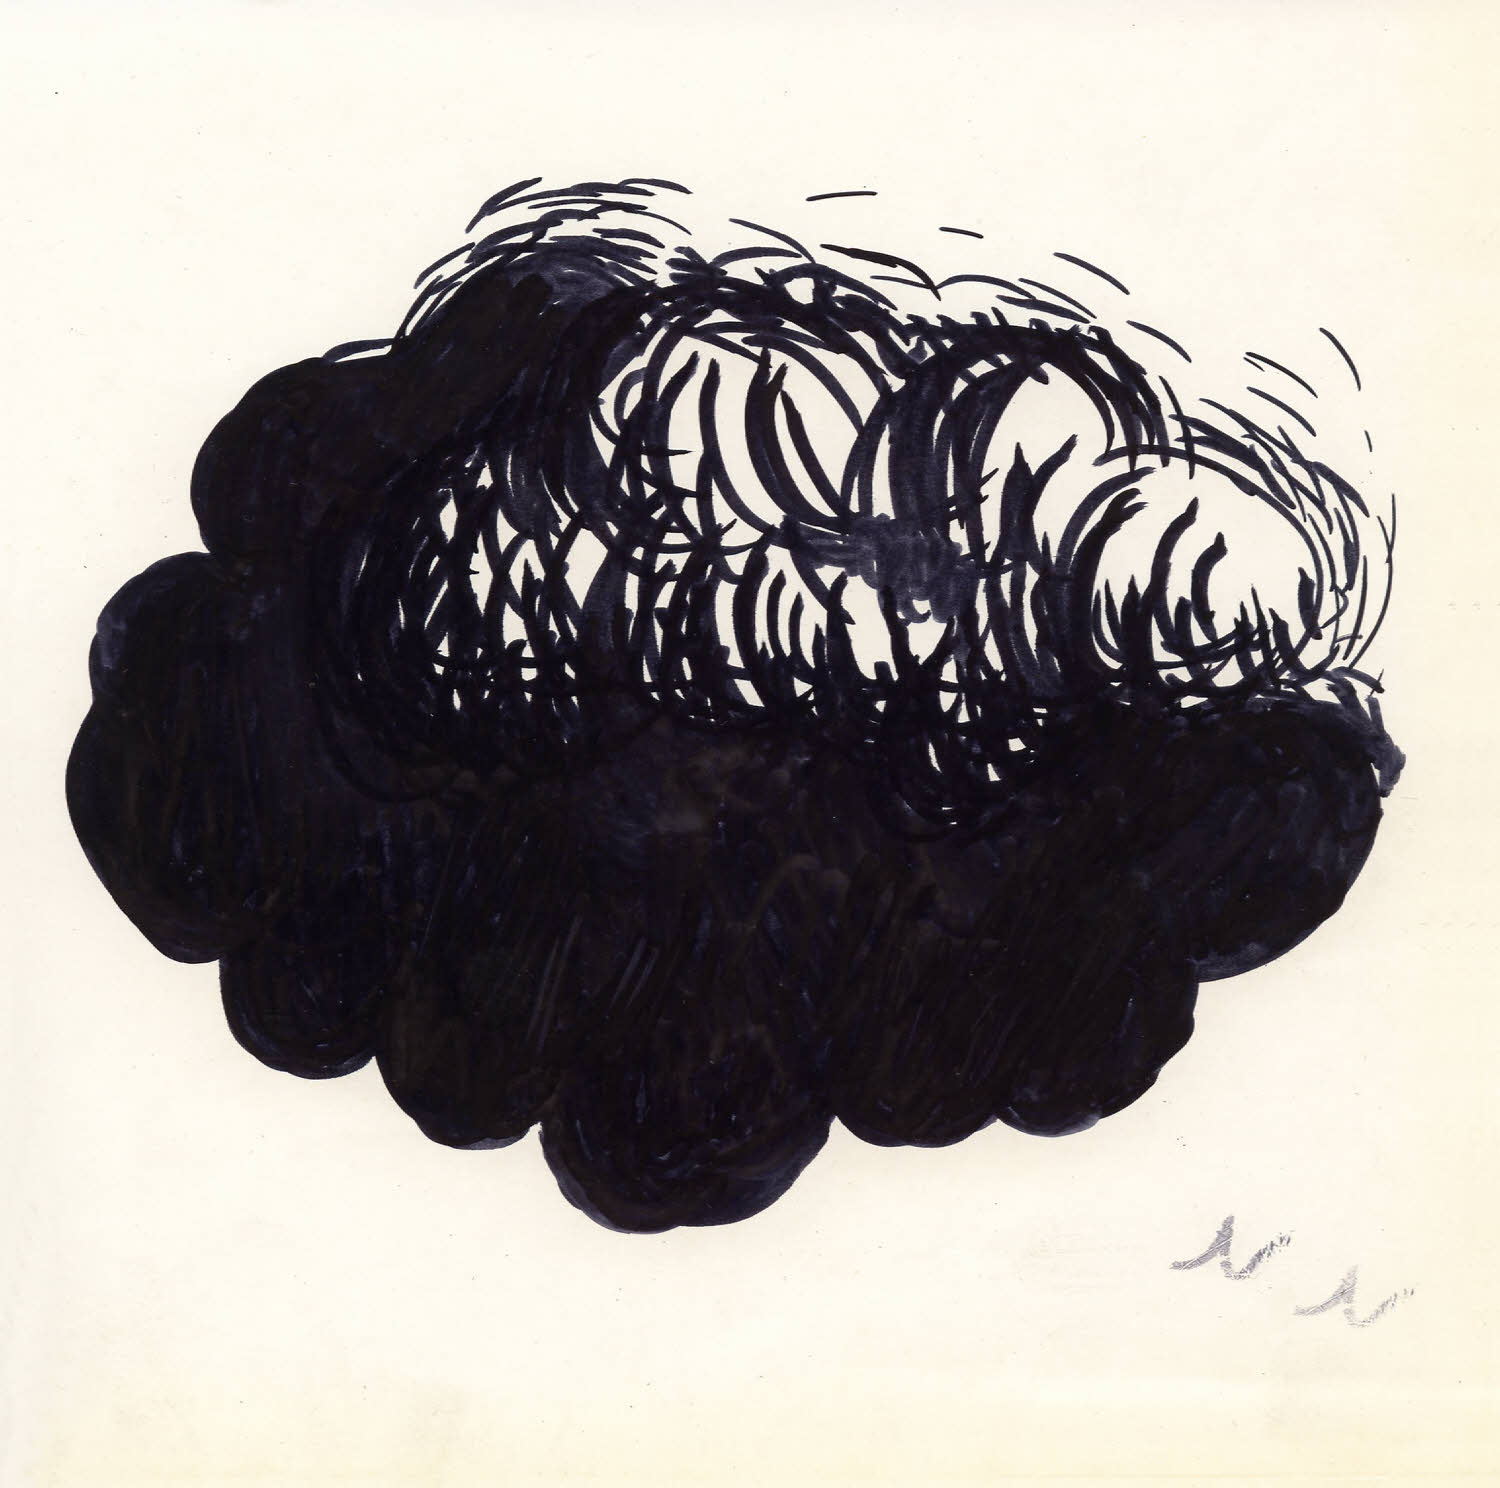 Overcloud, 2005, ink on texture paper, 7.5x7.6 inches